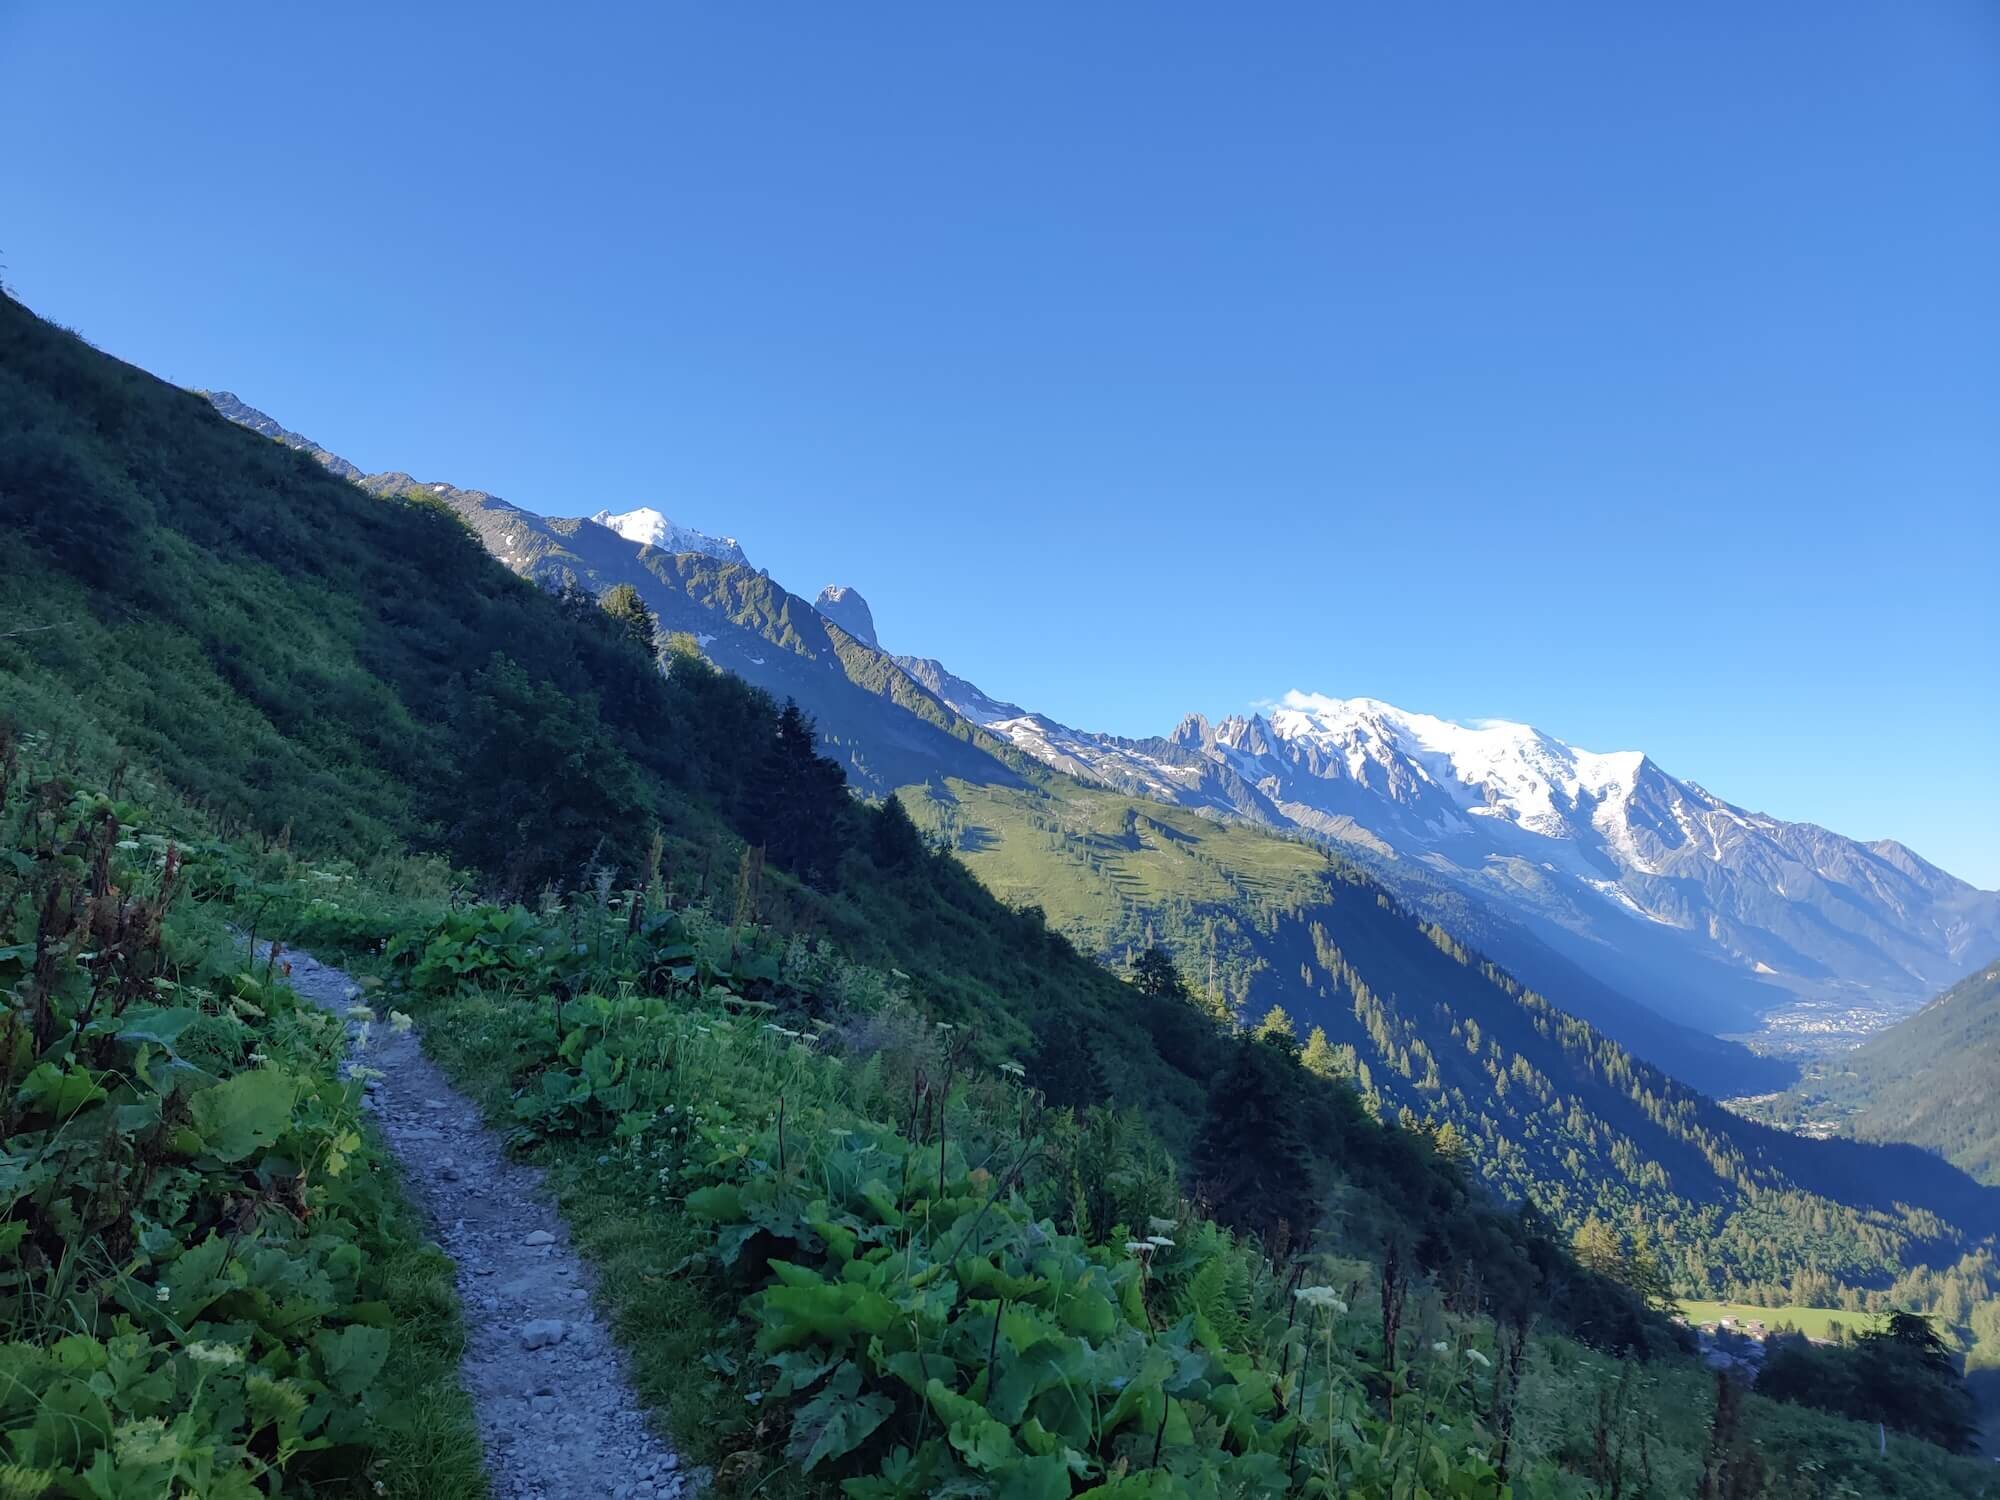 Balcony trail with Mont Blanc massif in background